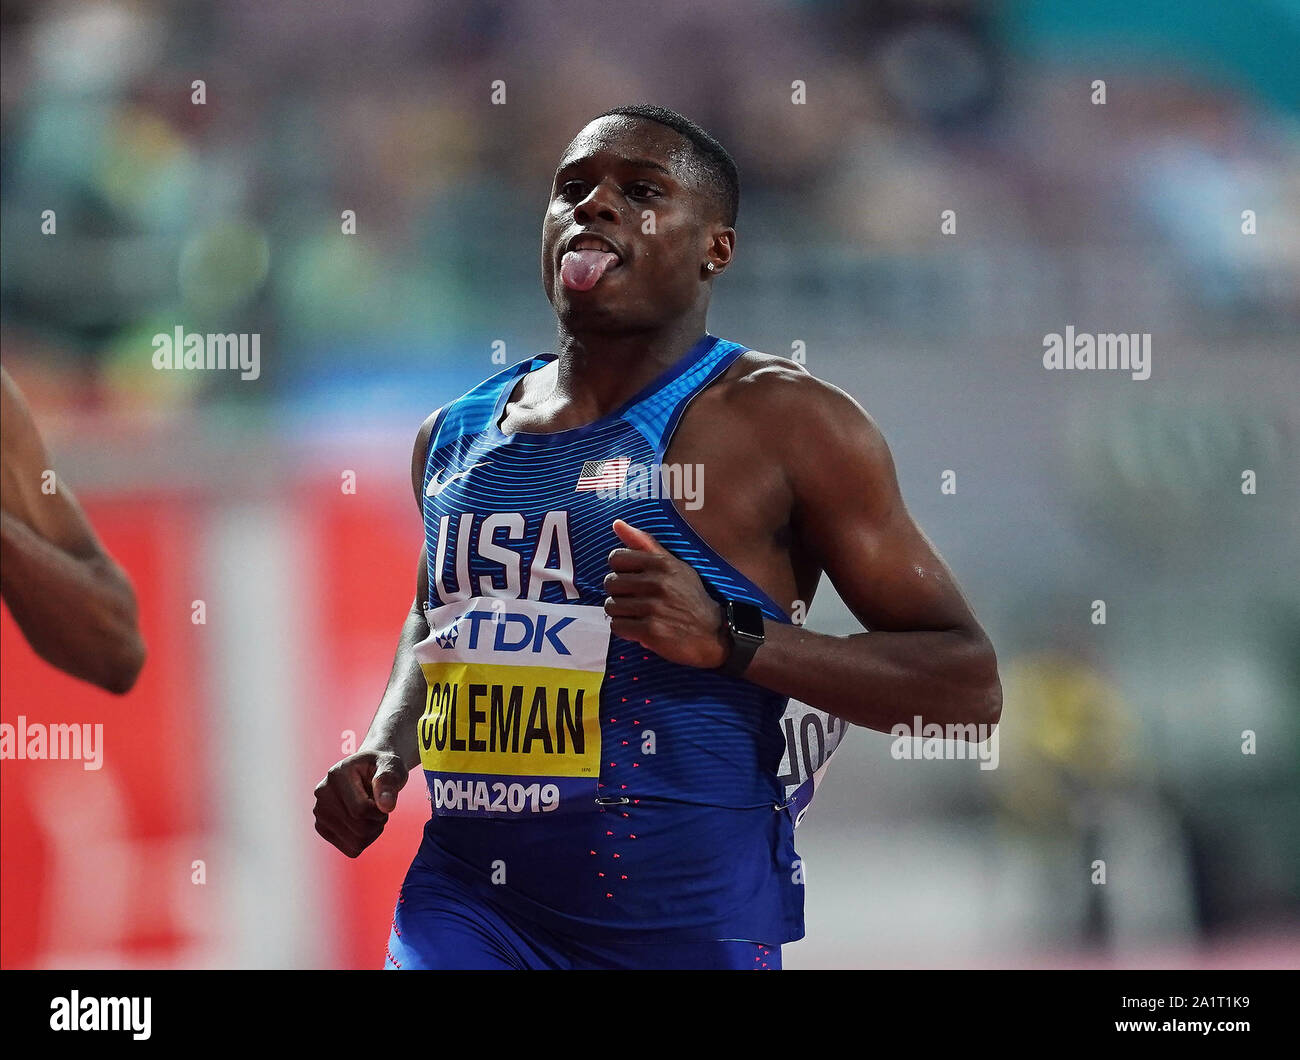 Doha, Qatar. 28th Sep, 2019. Christian Coleman of United States competing in the 100 meter for men during the 17th IAAF World Athletics Championships at the Khalifa Stadium in Doha, Qatar. Ulrik Pedersen/CSM/Alamy Live News Stock Photo